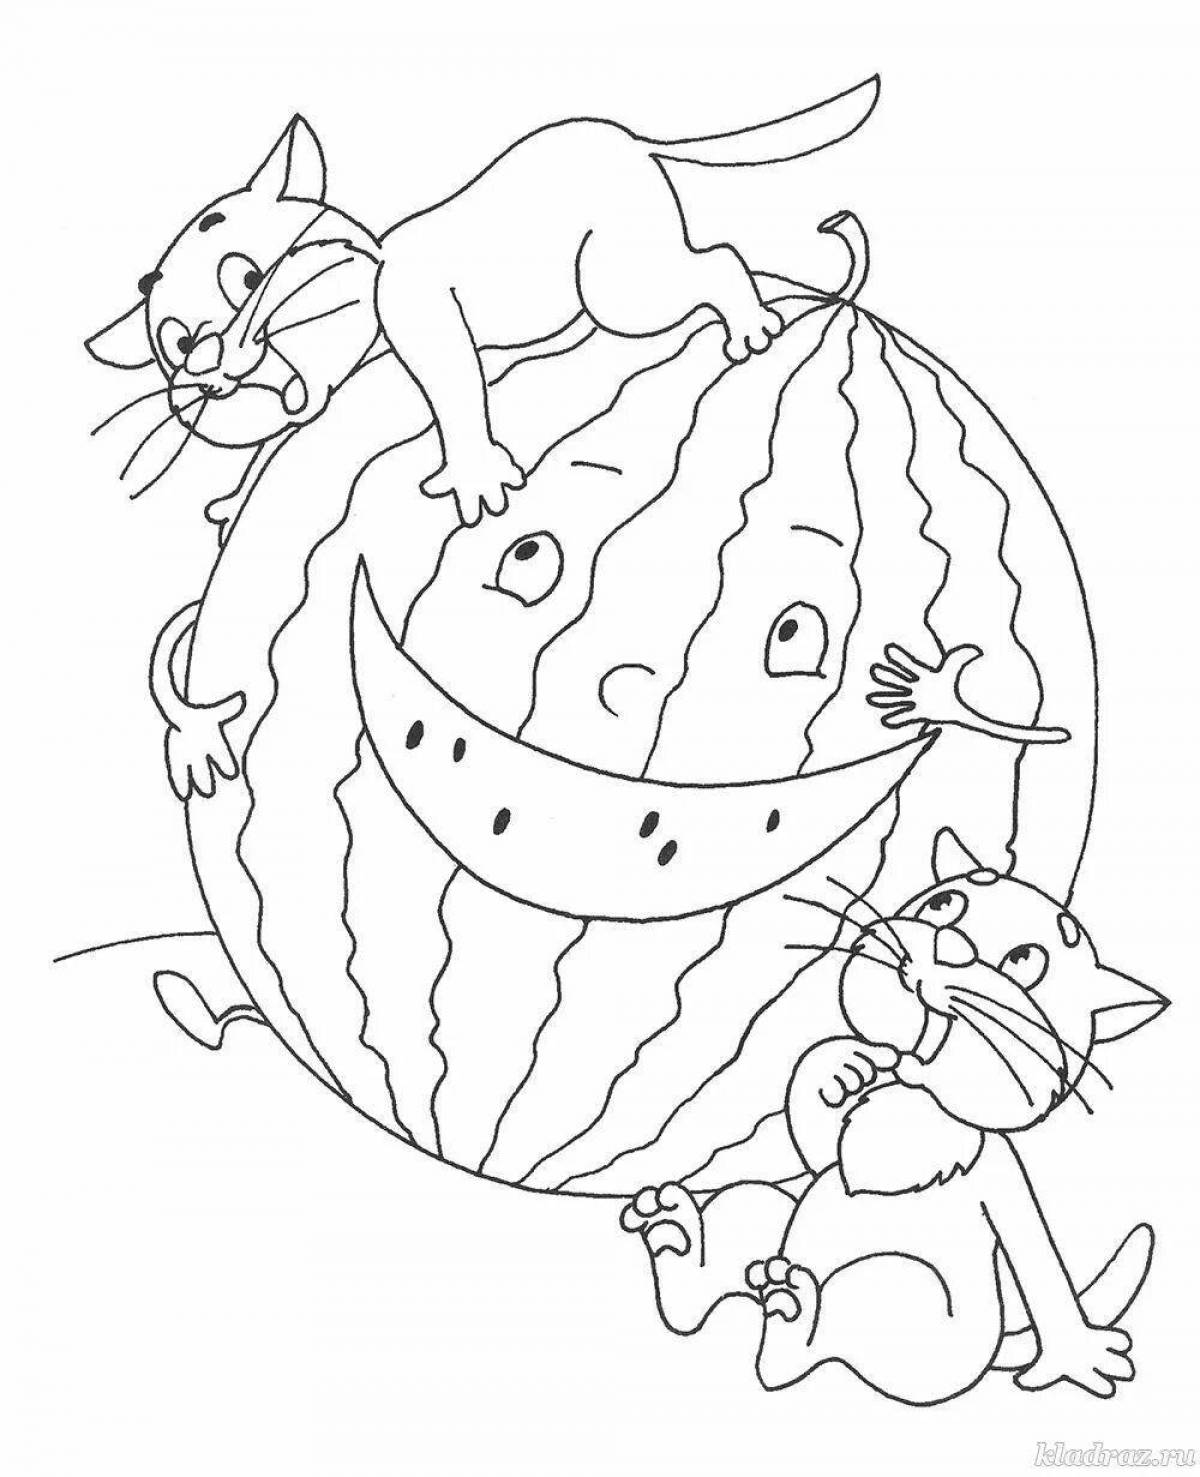 Creative coloring puzzles for kids